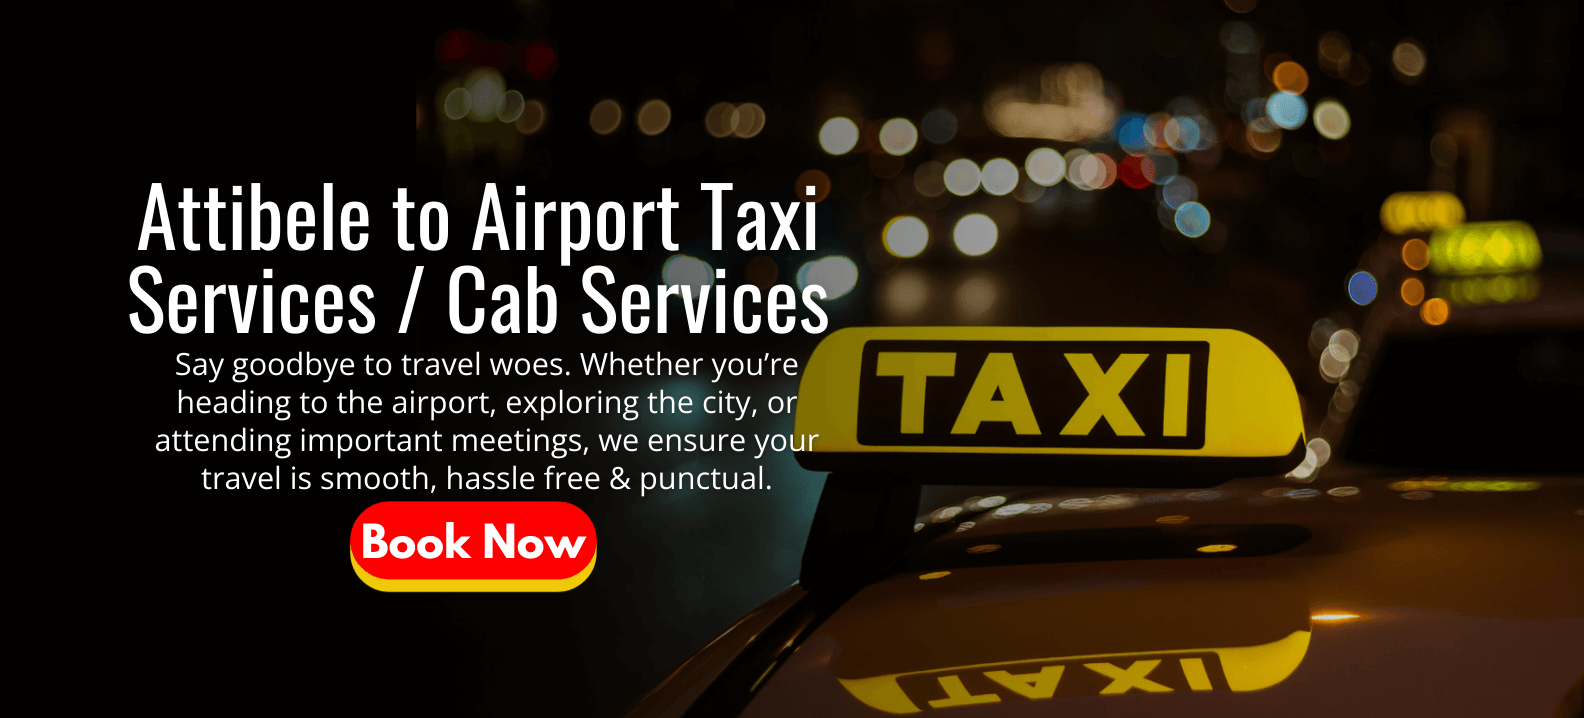 Attibele to Airport Taxi Services _ Cab Services